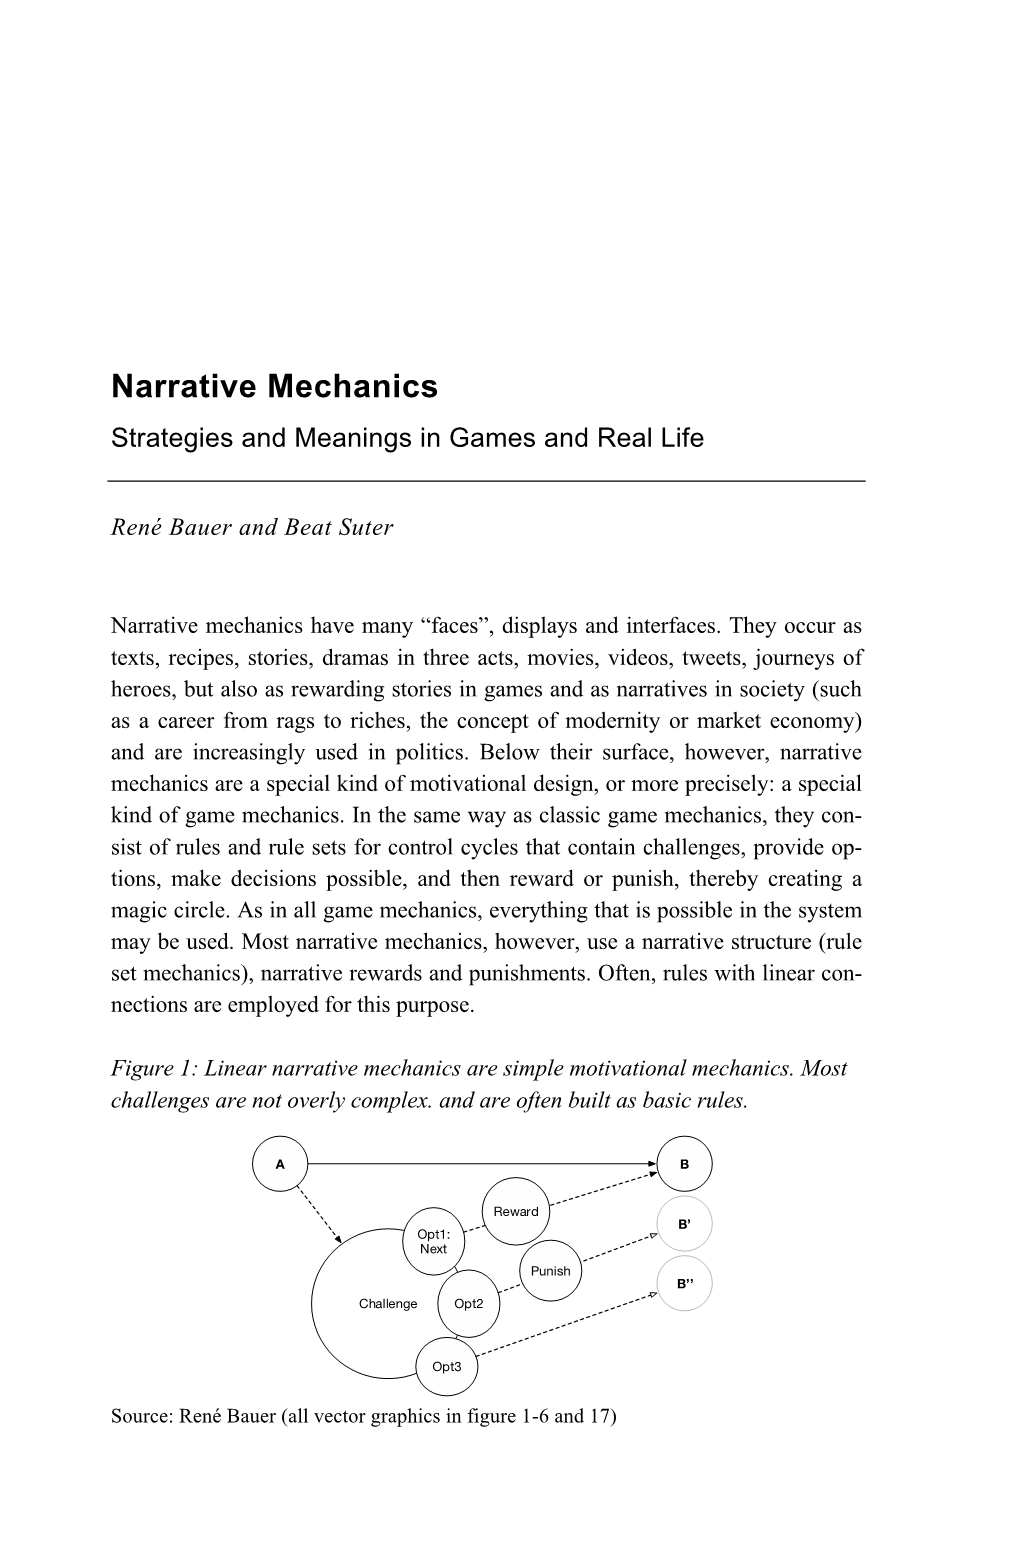 Narrative Mechanics Strategies and Meanings in Games and Real Life